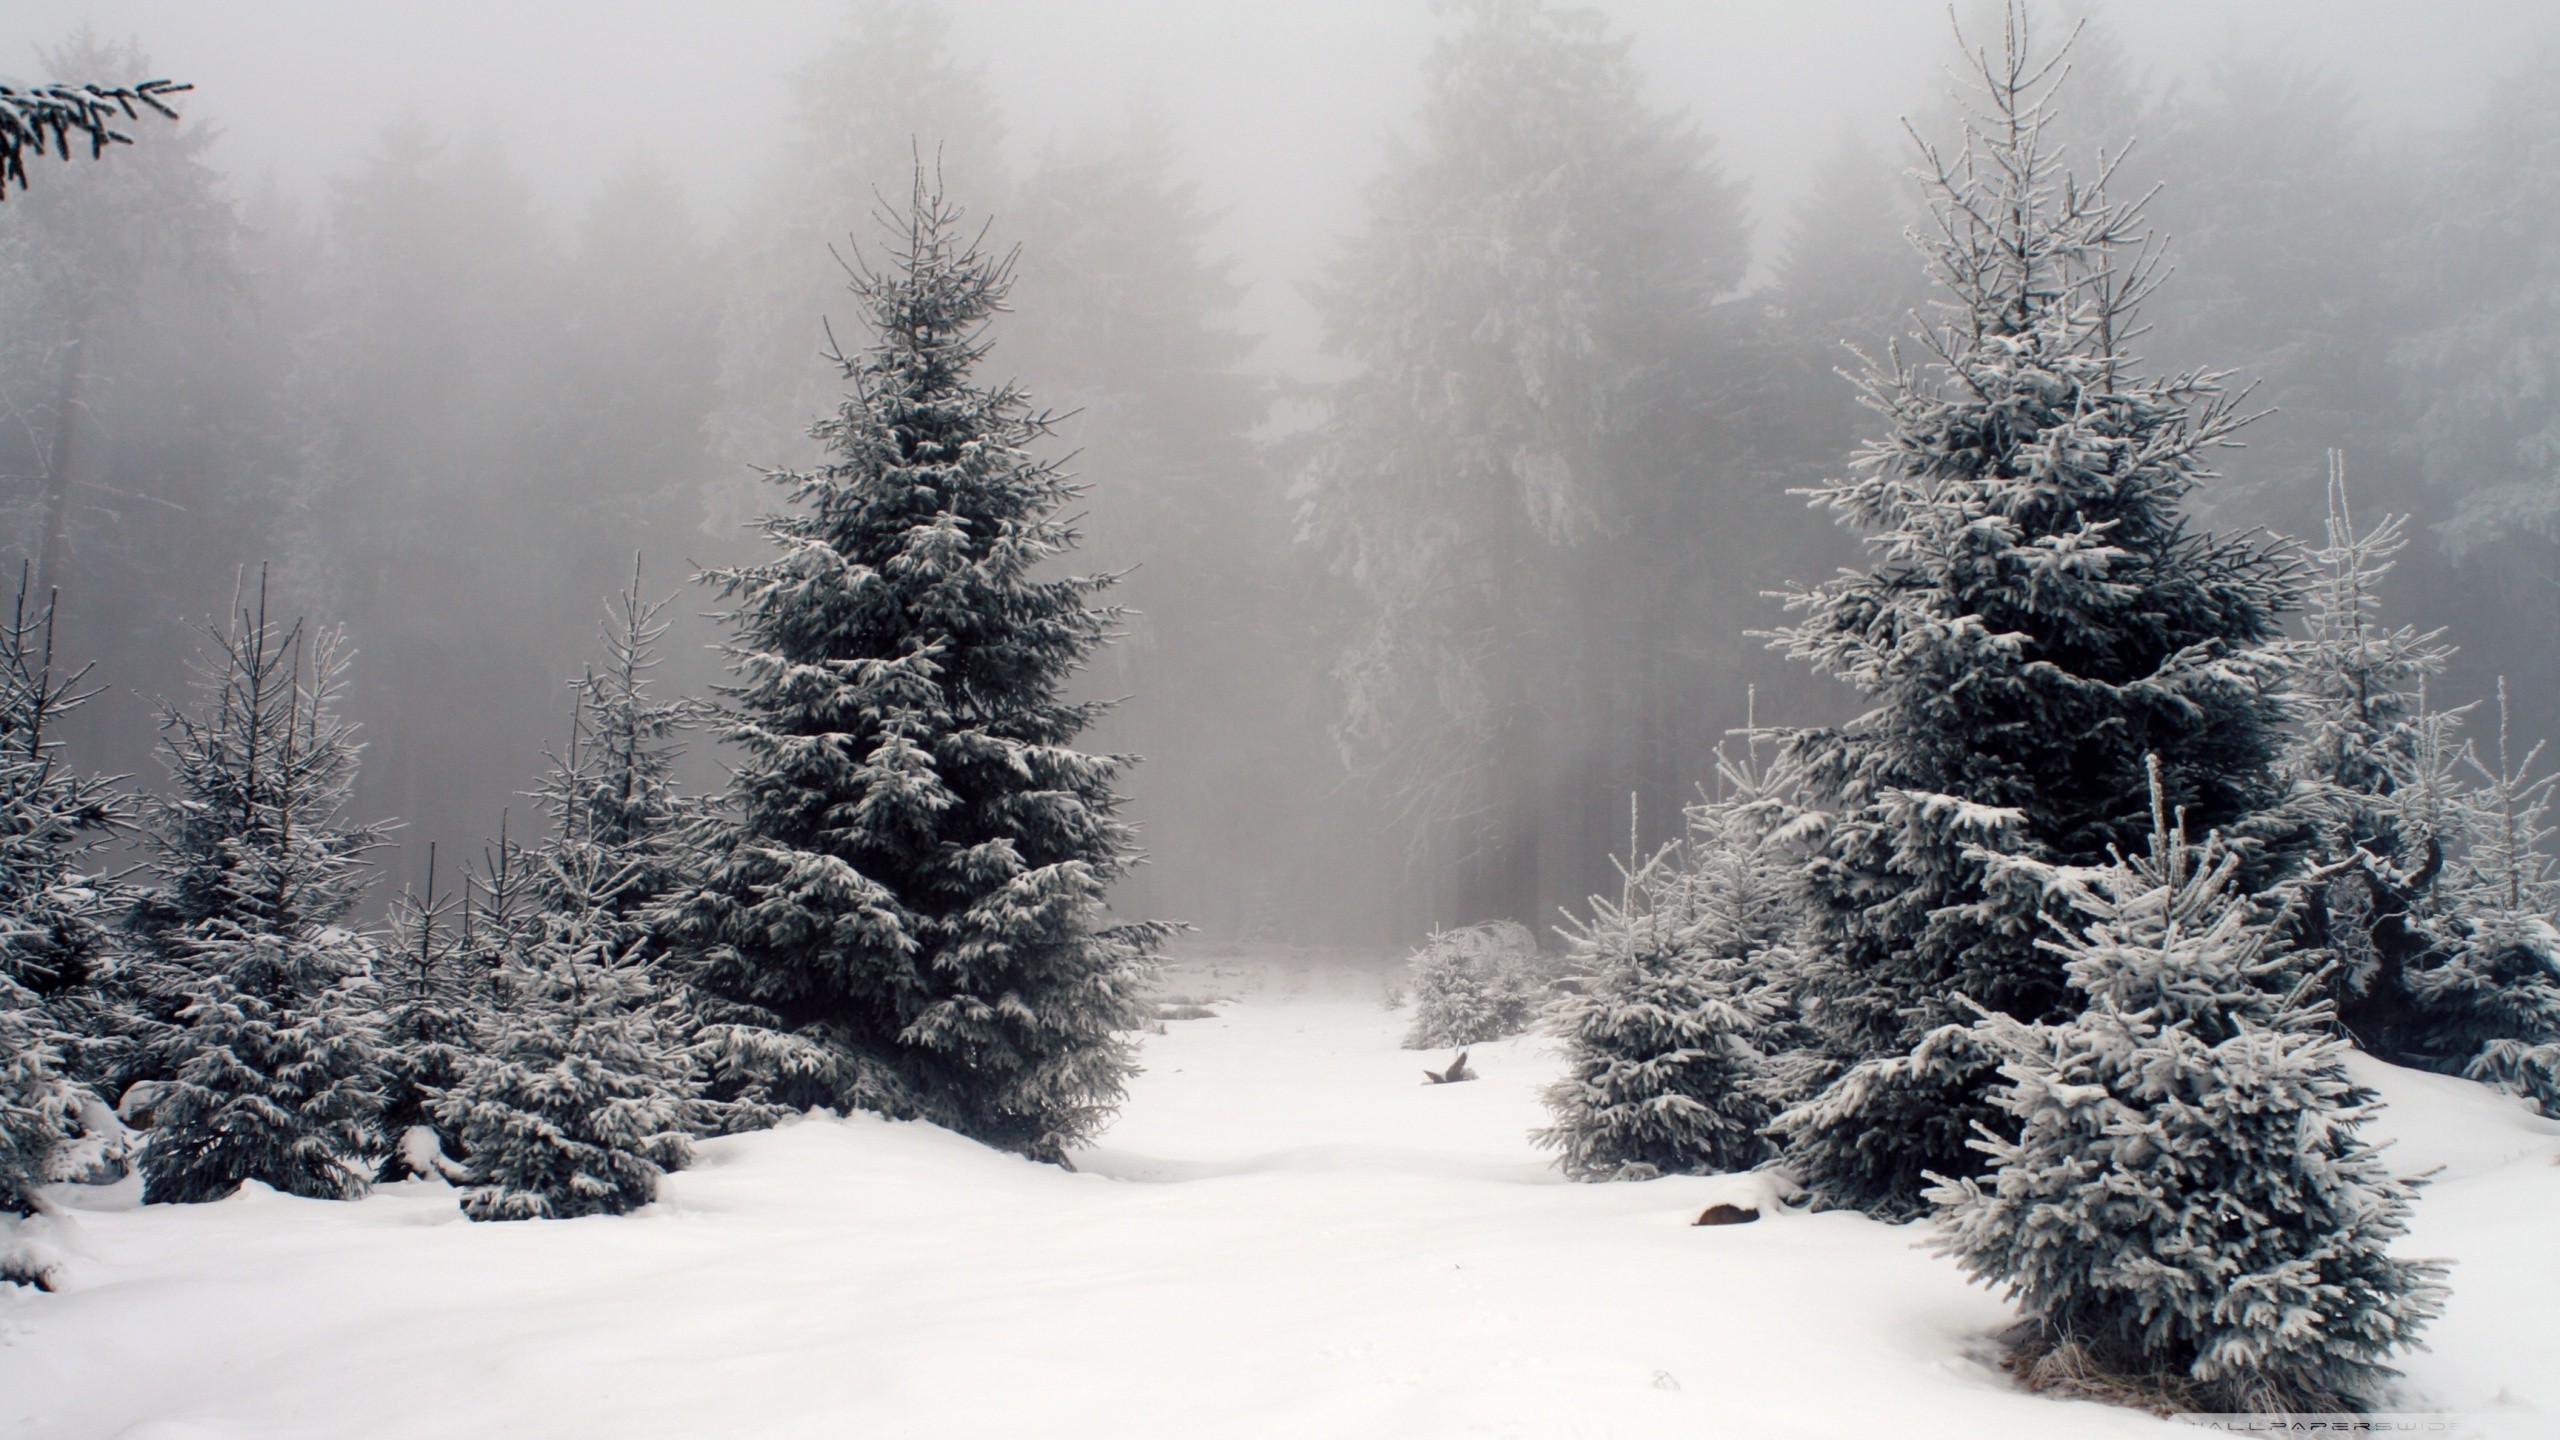 General 2560x1440 nature landscape snow forest winter cold ice trees outdoors